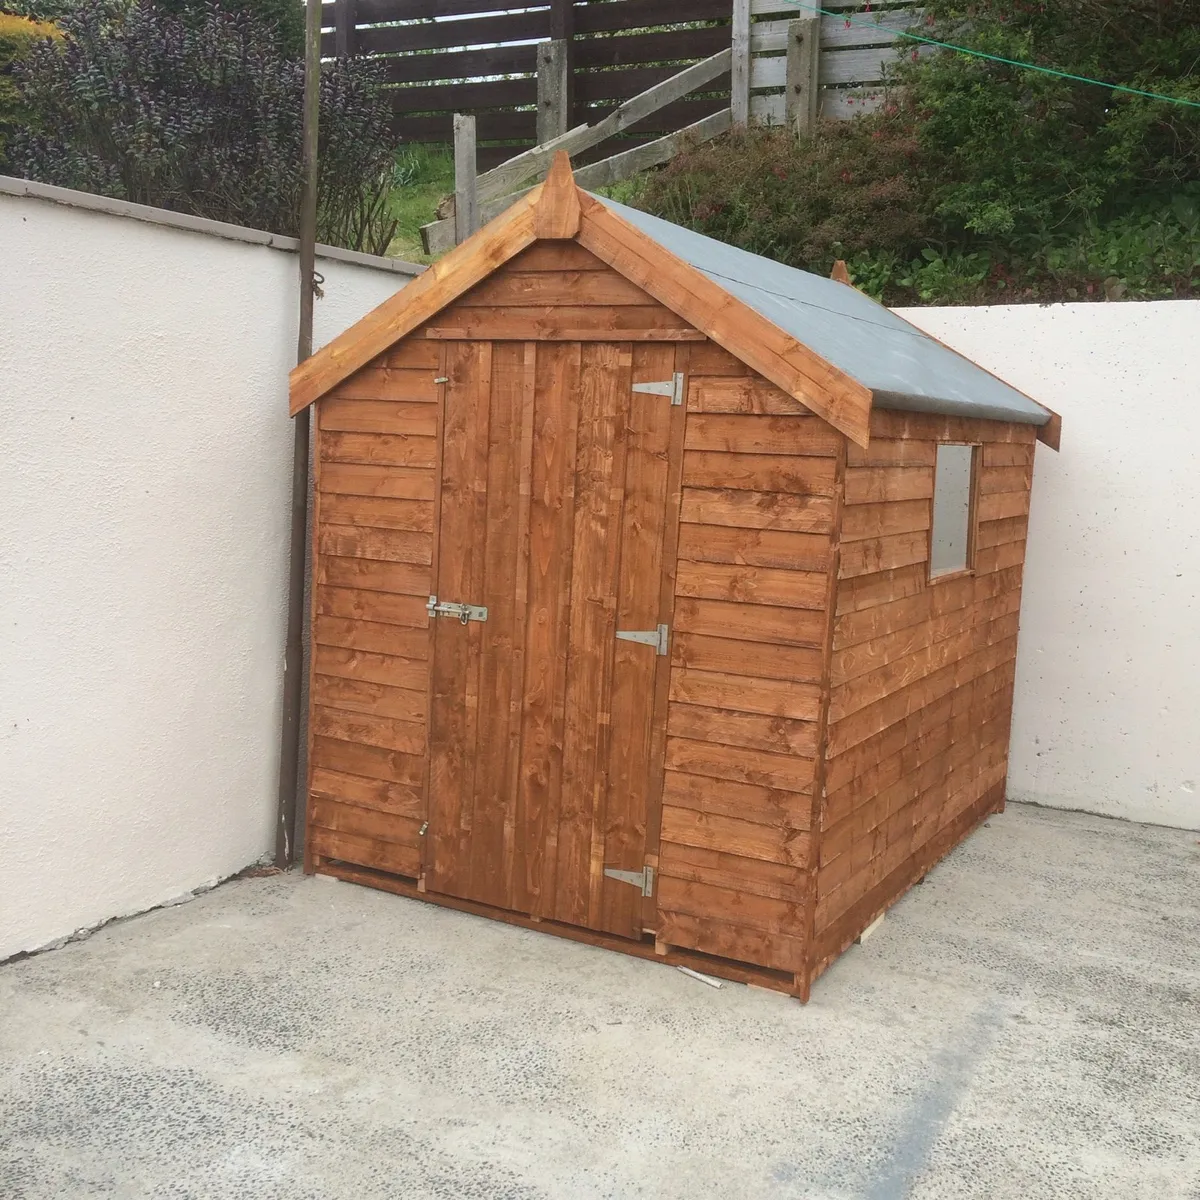 GARDEN SHED SALE !! 8ft x 6ft RUSTIC ONLY €495.00 - Image 1